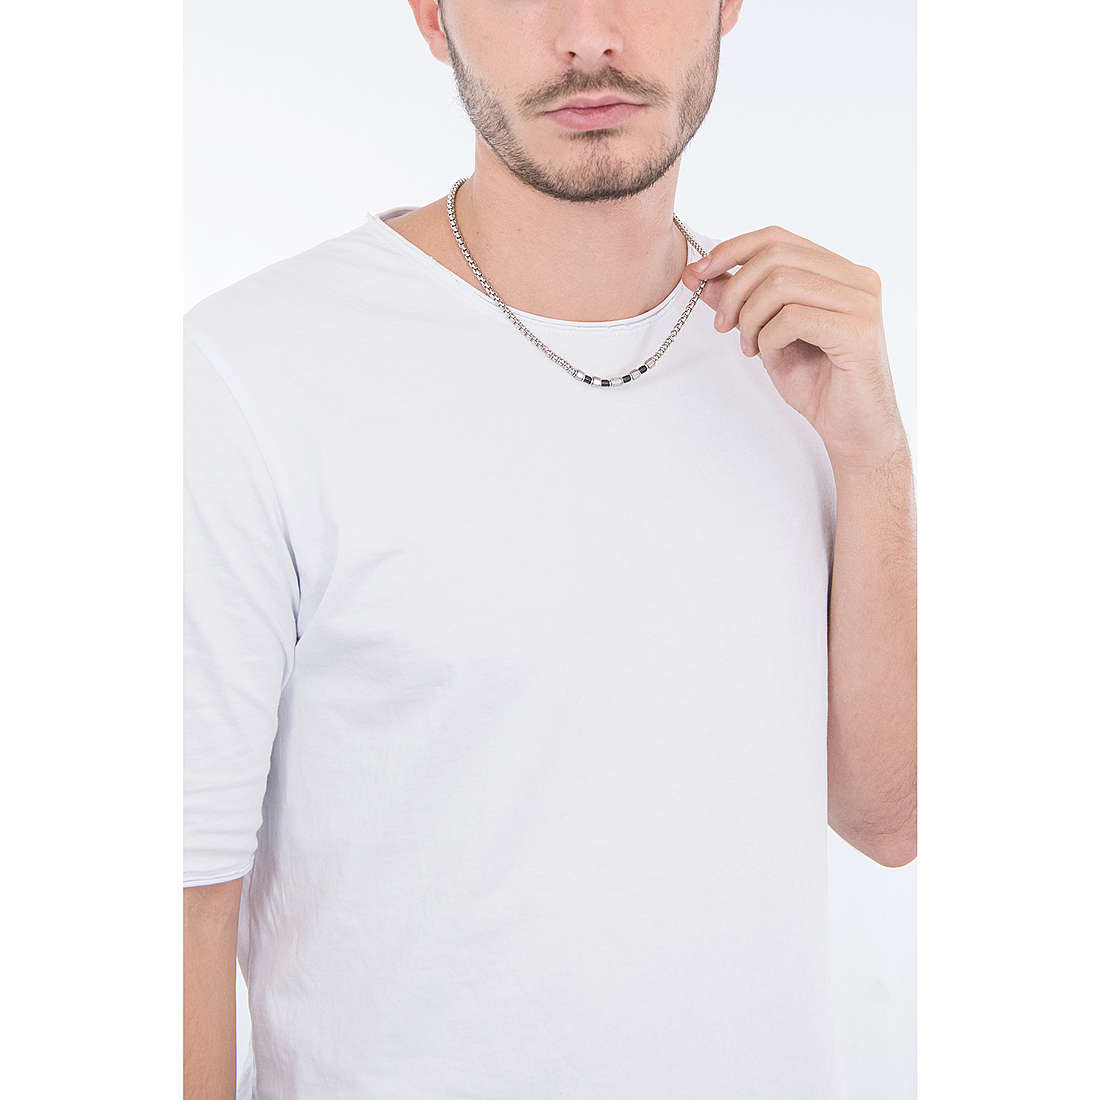 Luca Barra necklaces man CL225 wearing